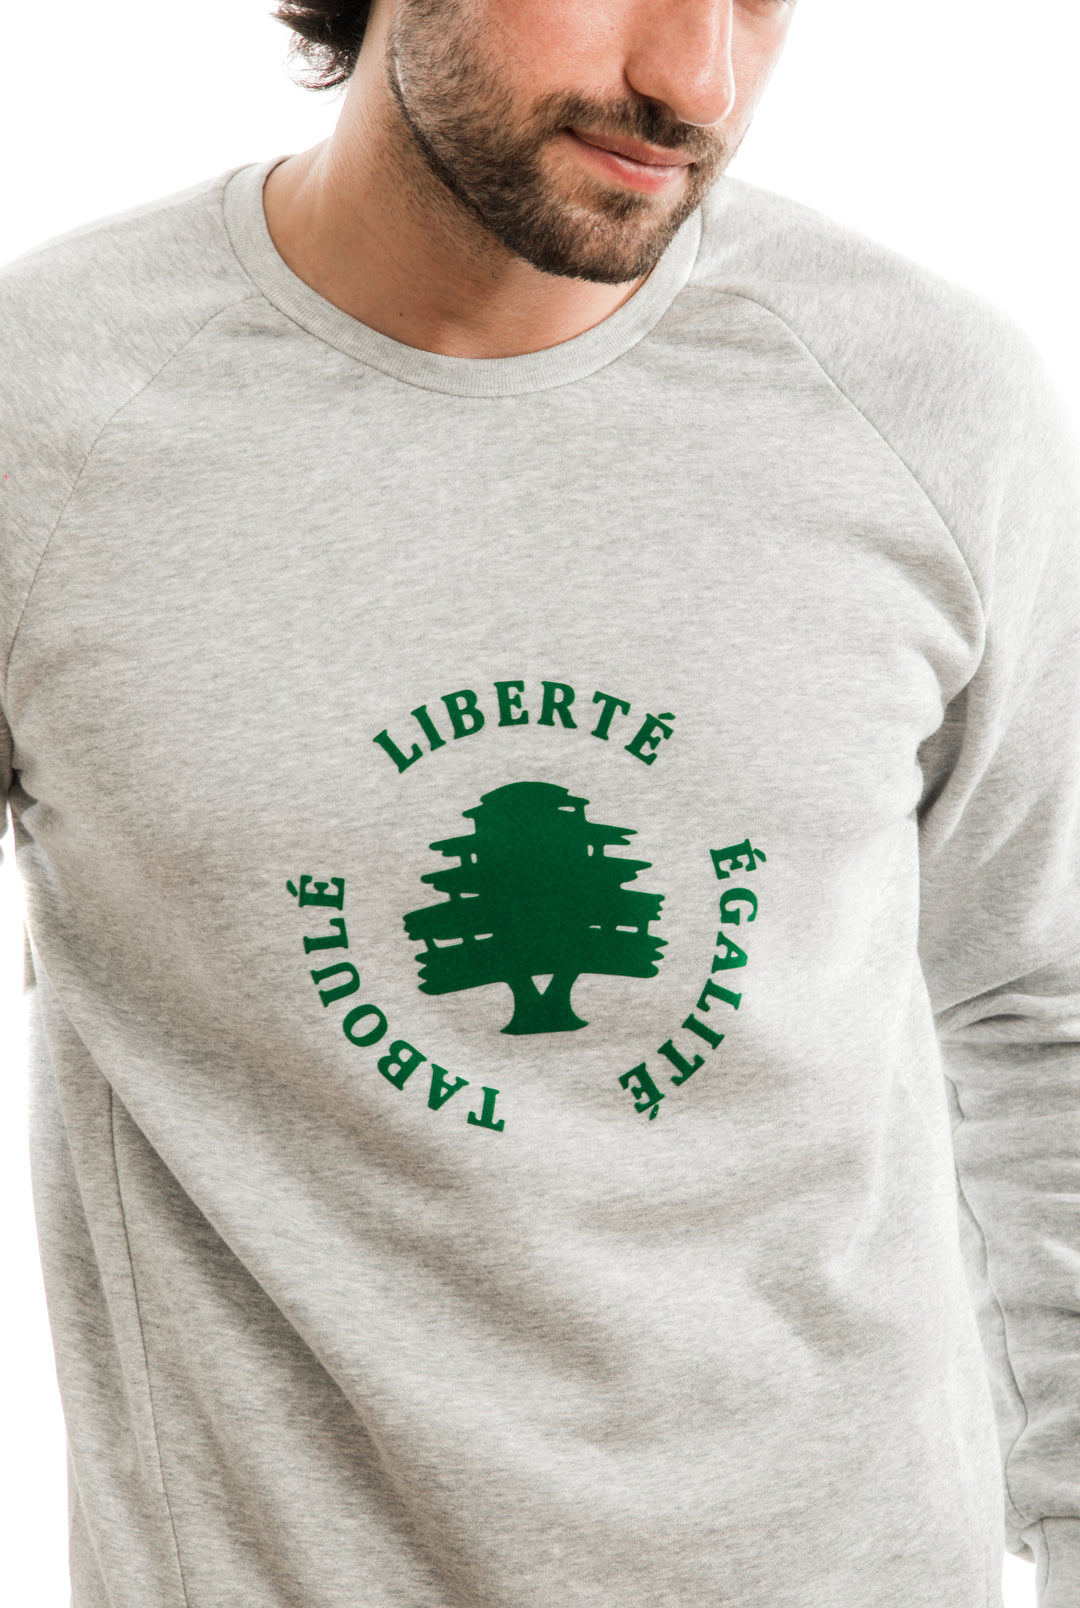 Young adult male wearing grey Sweater with Liberté Égalité Taboulé written in French and printed in green velvet in the center of the sweater.